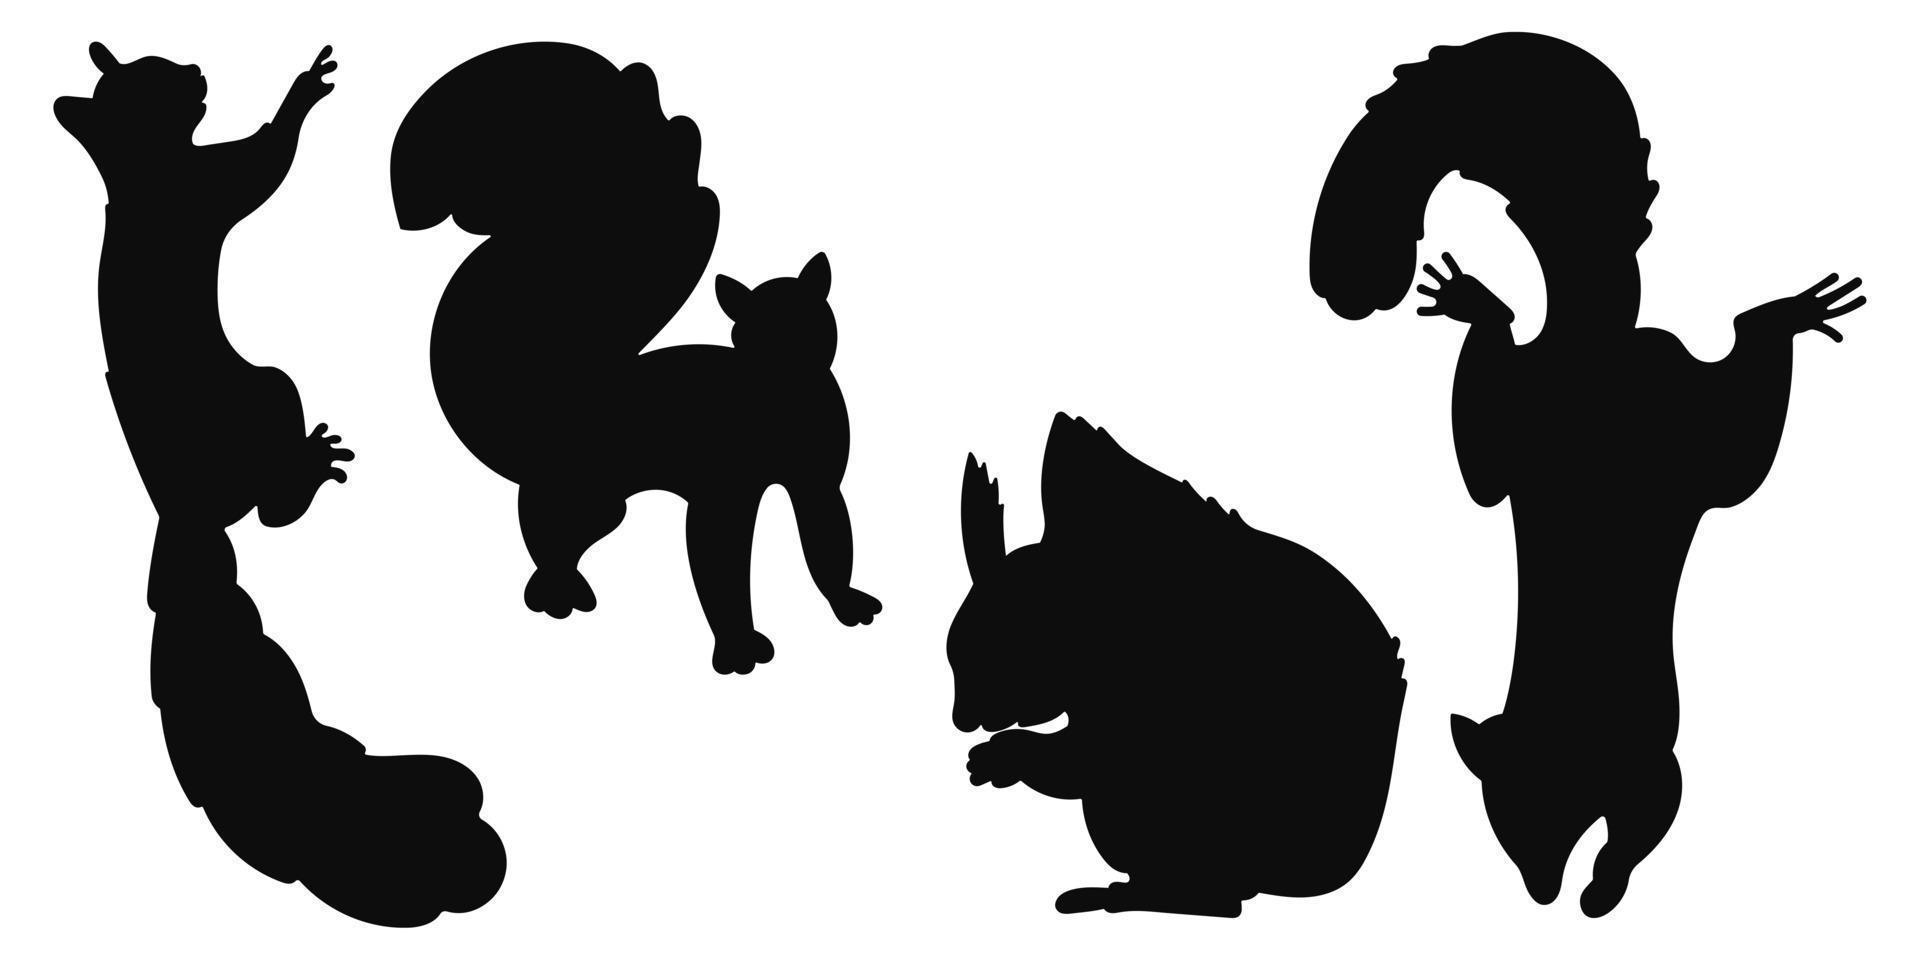 Vector set logo squirrels, silhouettes of wild animals hand drawn, isolated vector